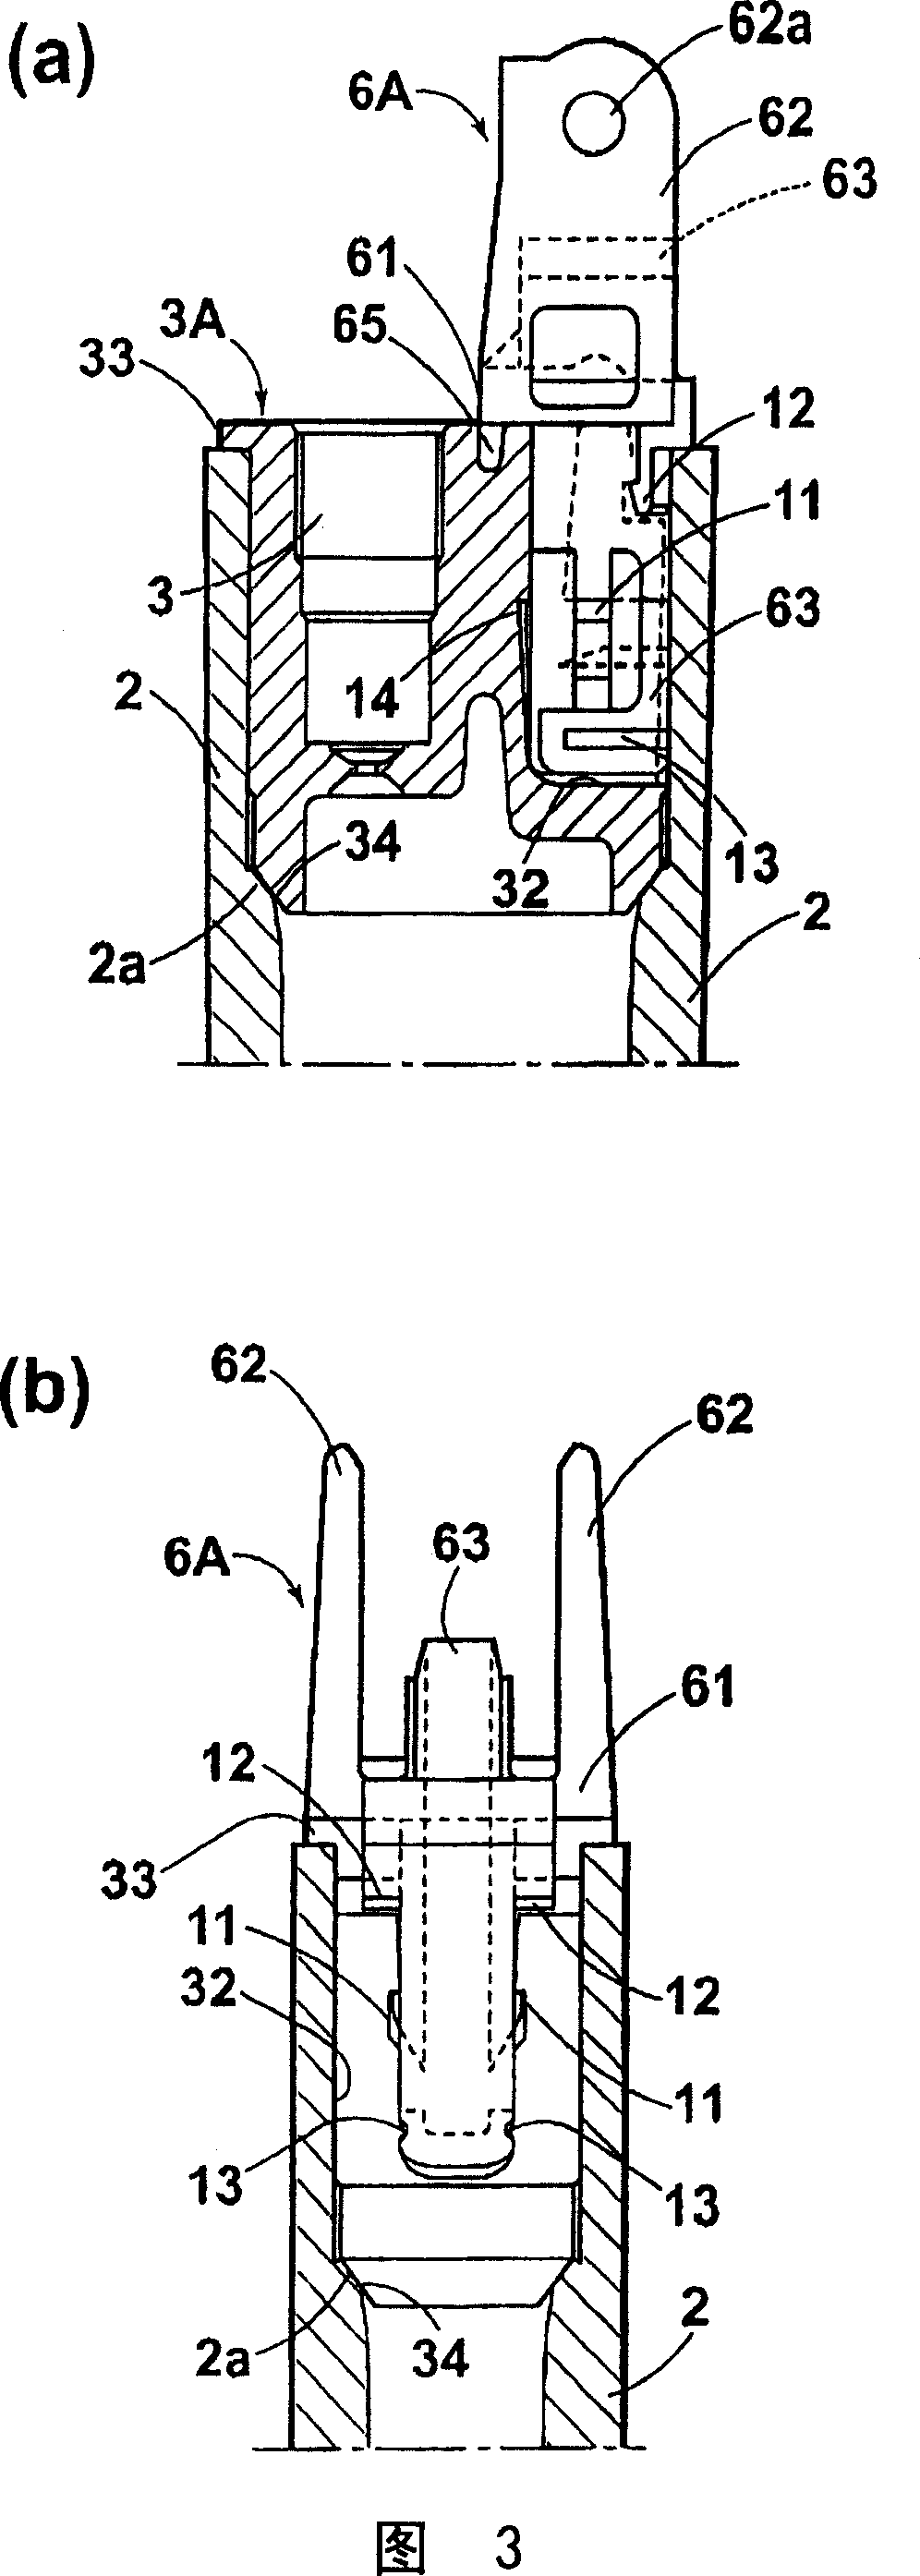 Assembling structure of igniter